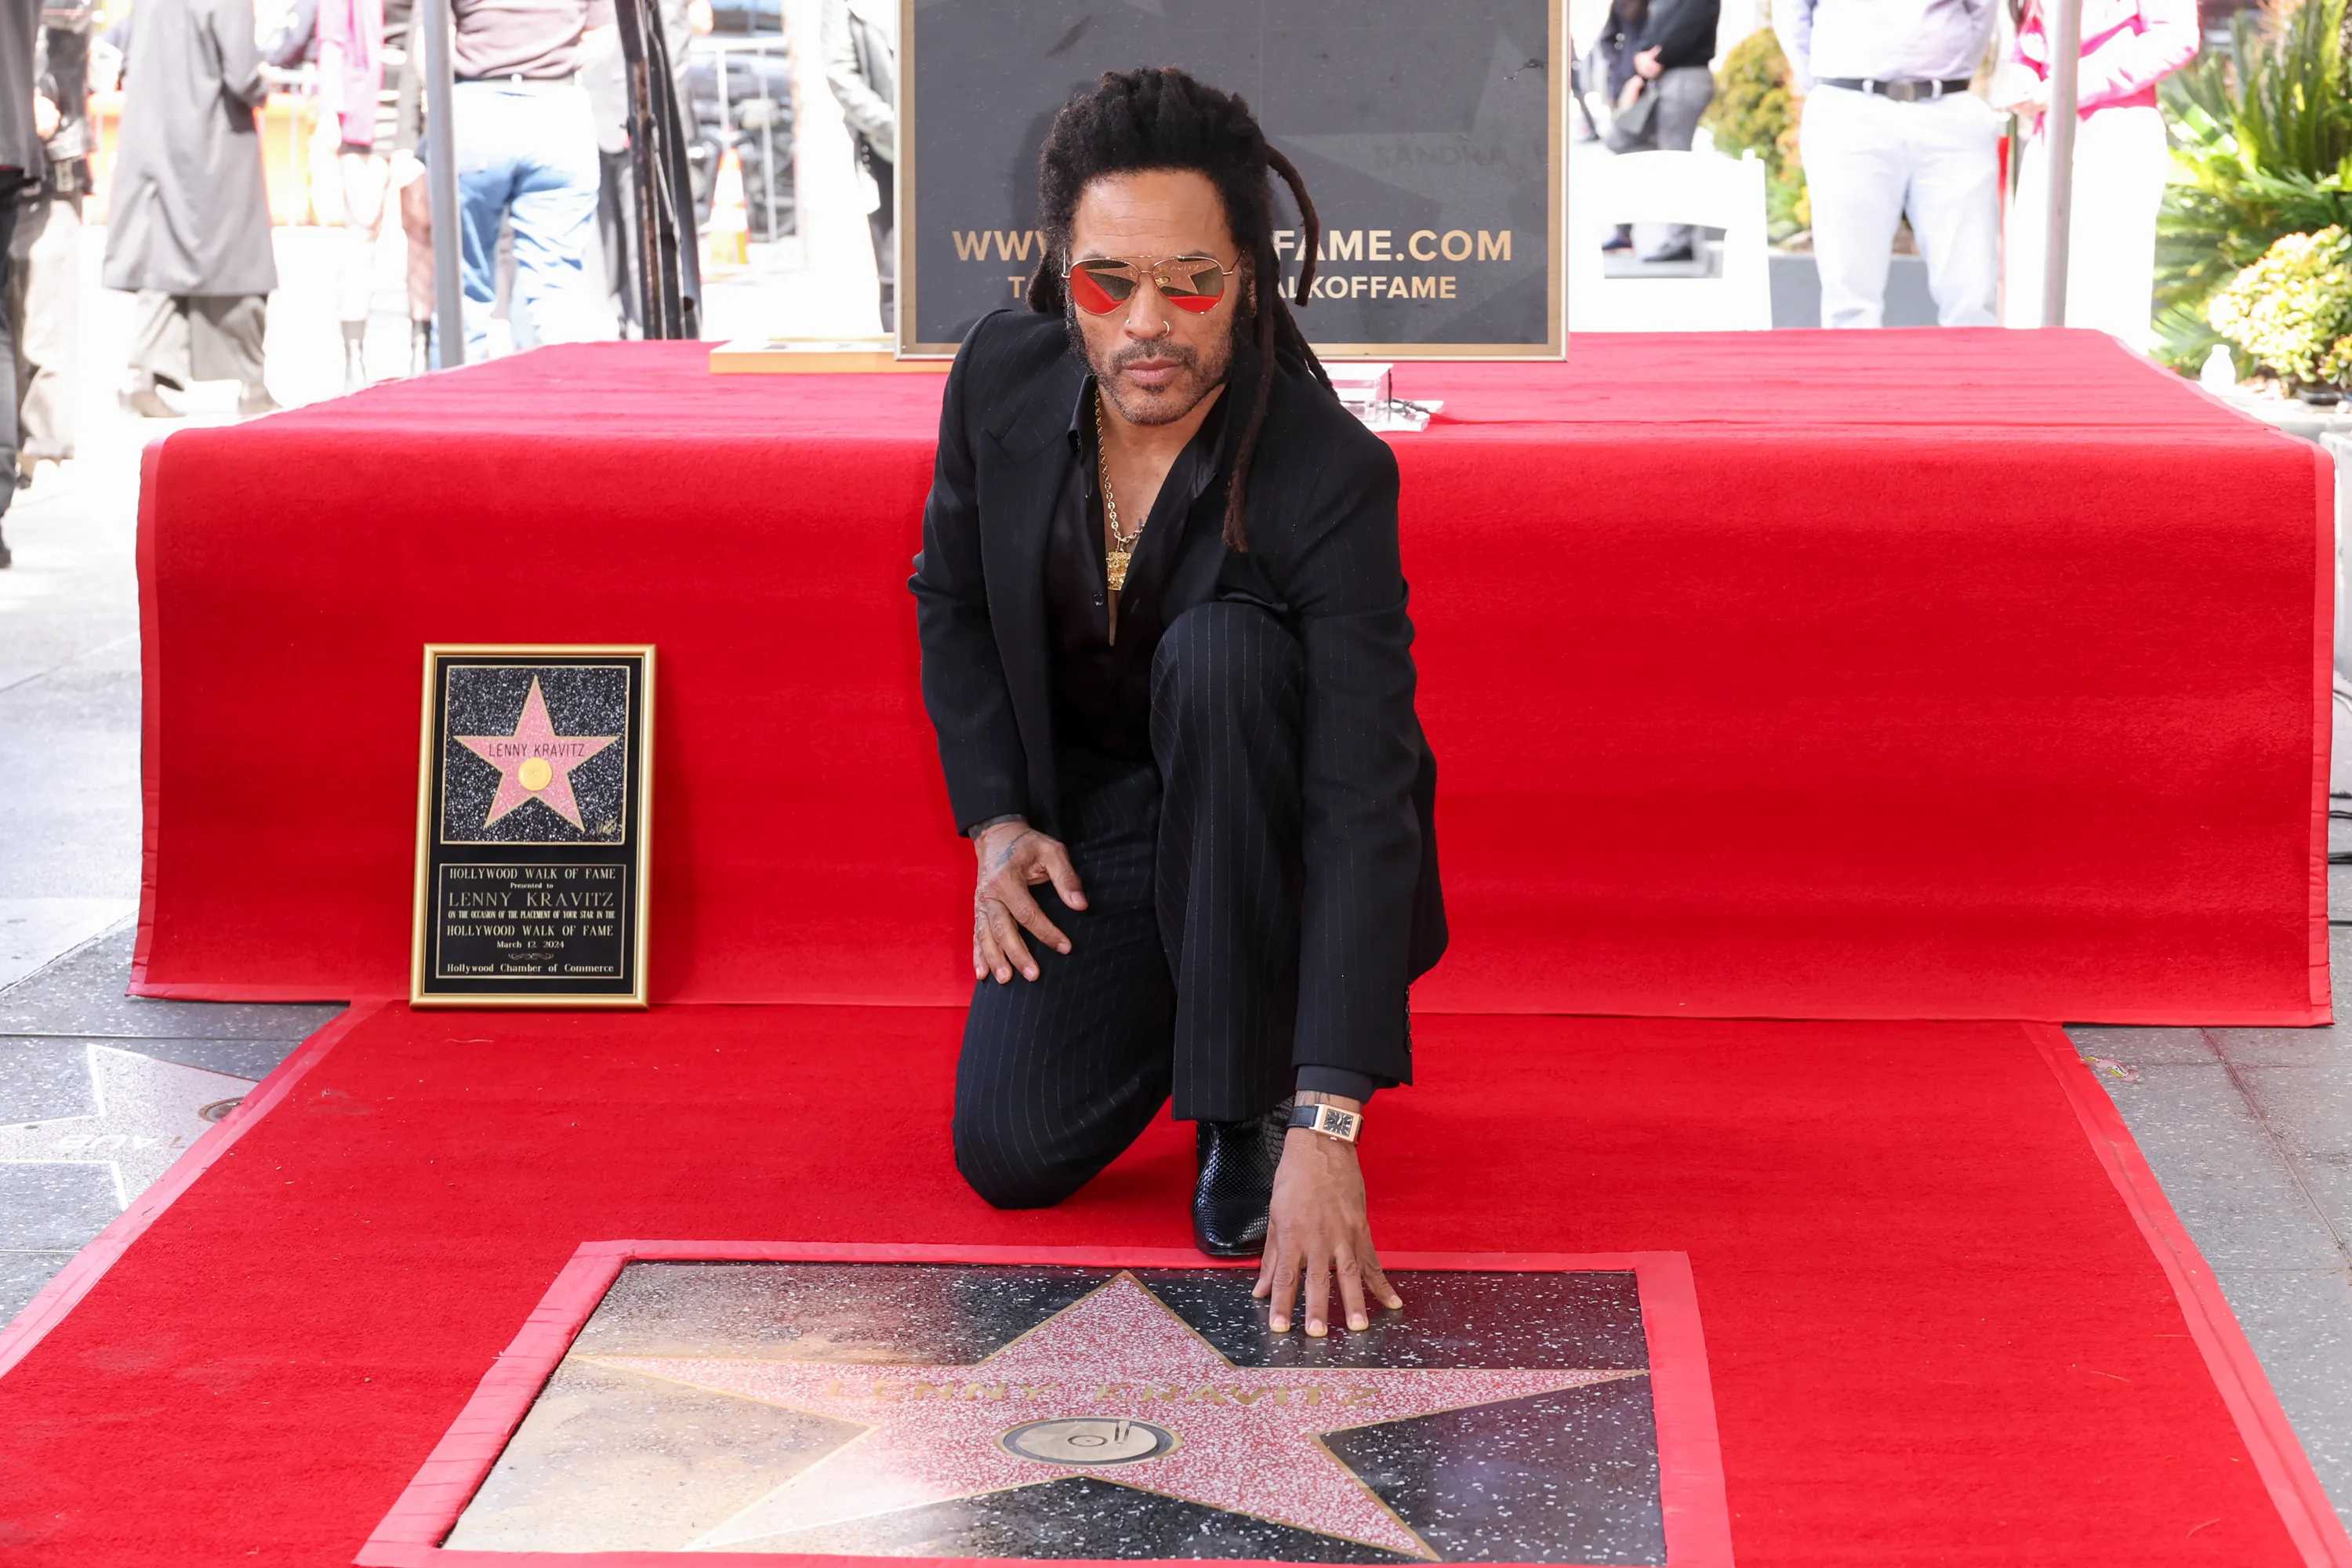 Lenny Kravitz opens up about being honoured with a star on the Hollywood walk of fame